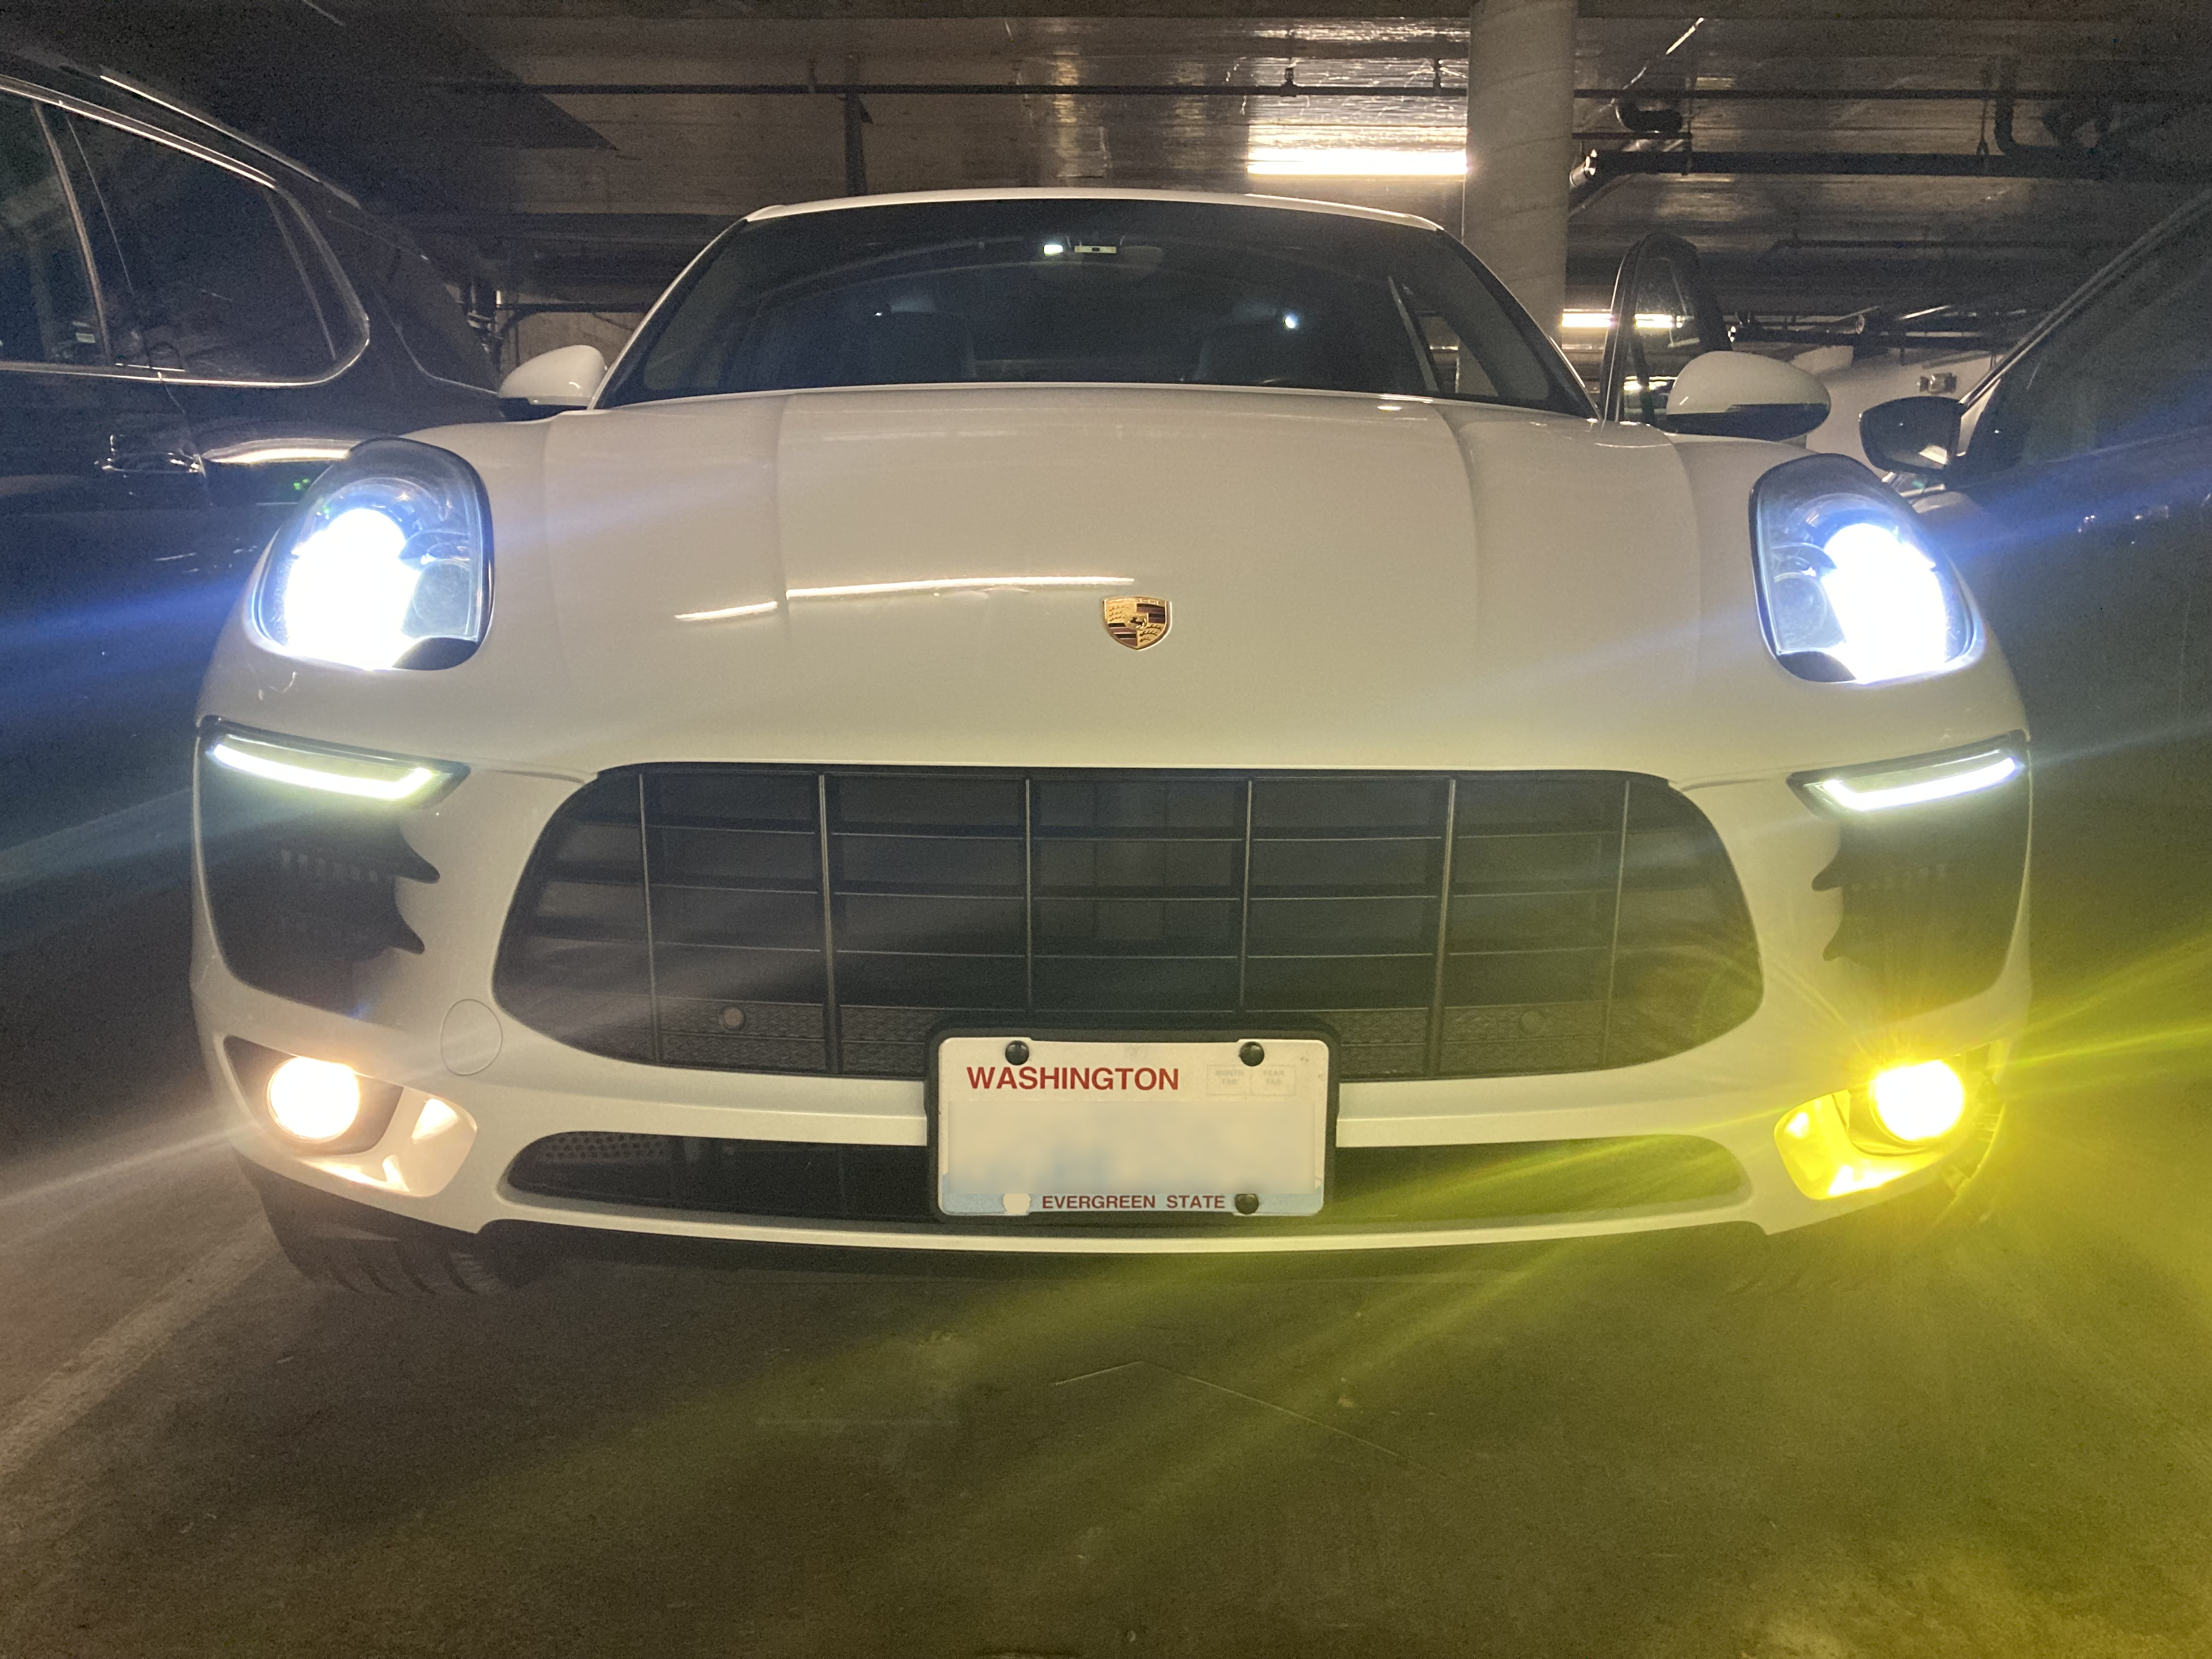 Stock foig light on the left and the LED fog light on the right.